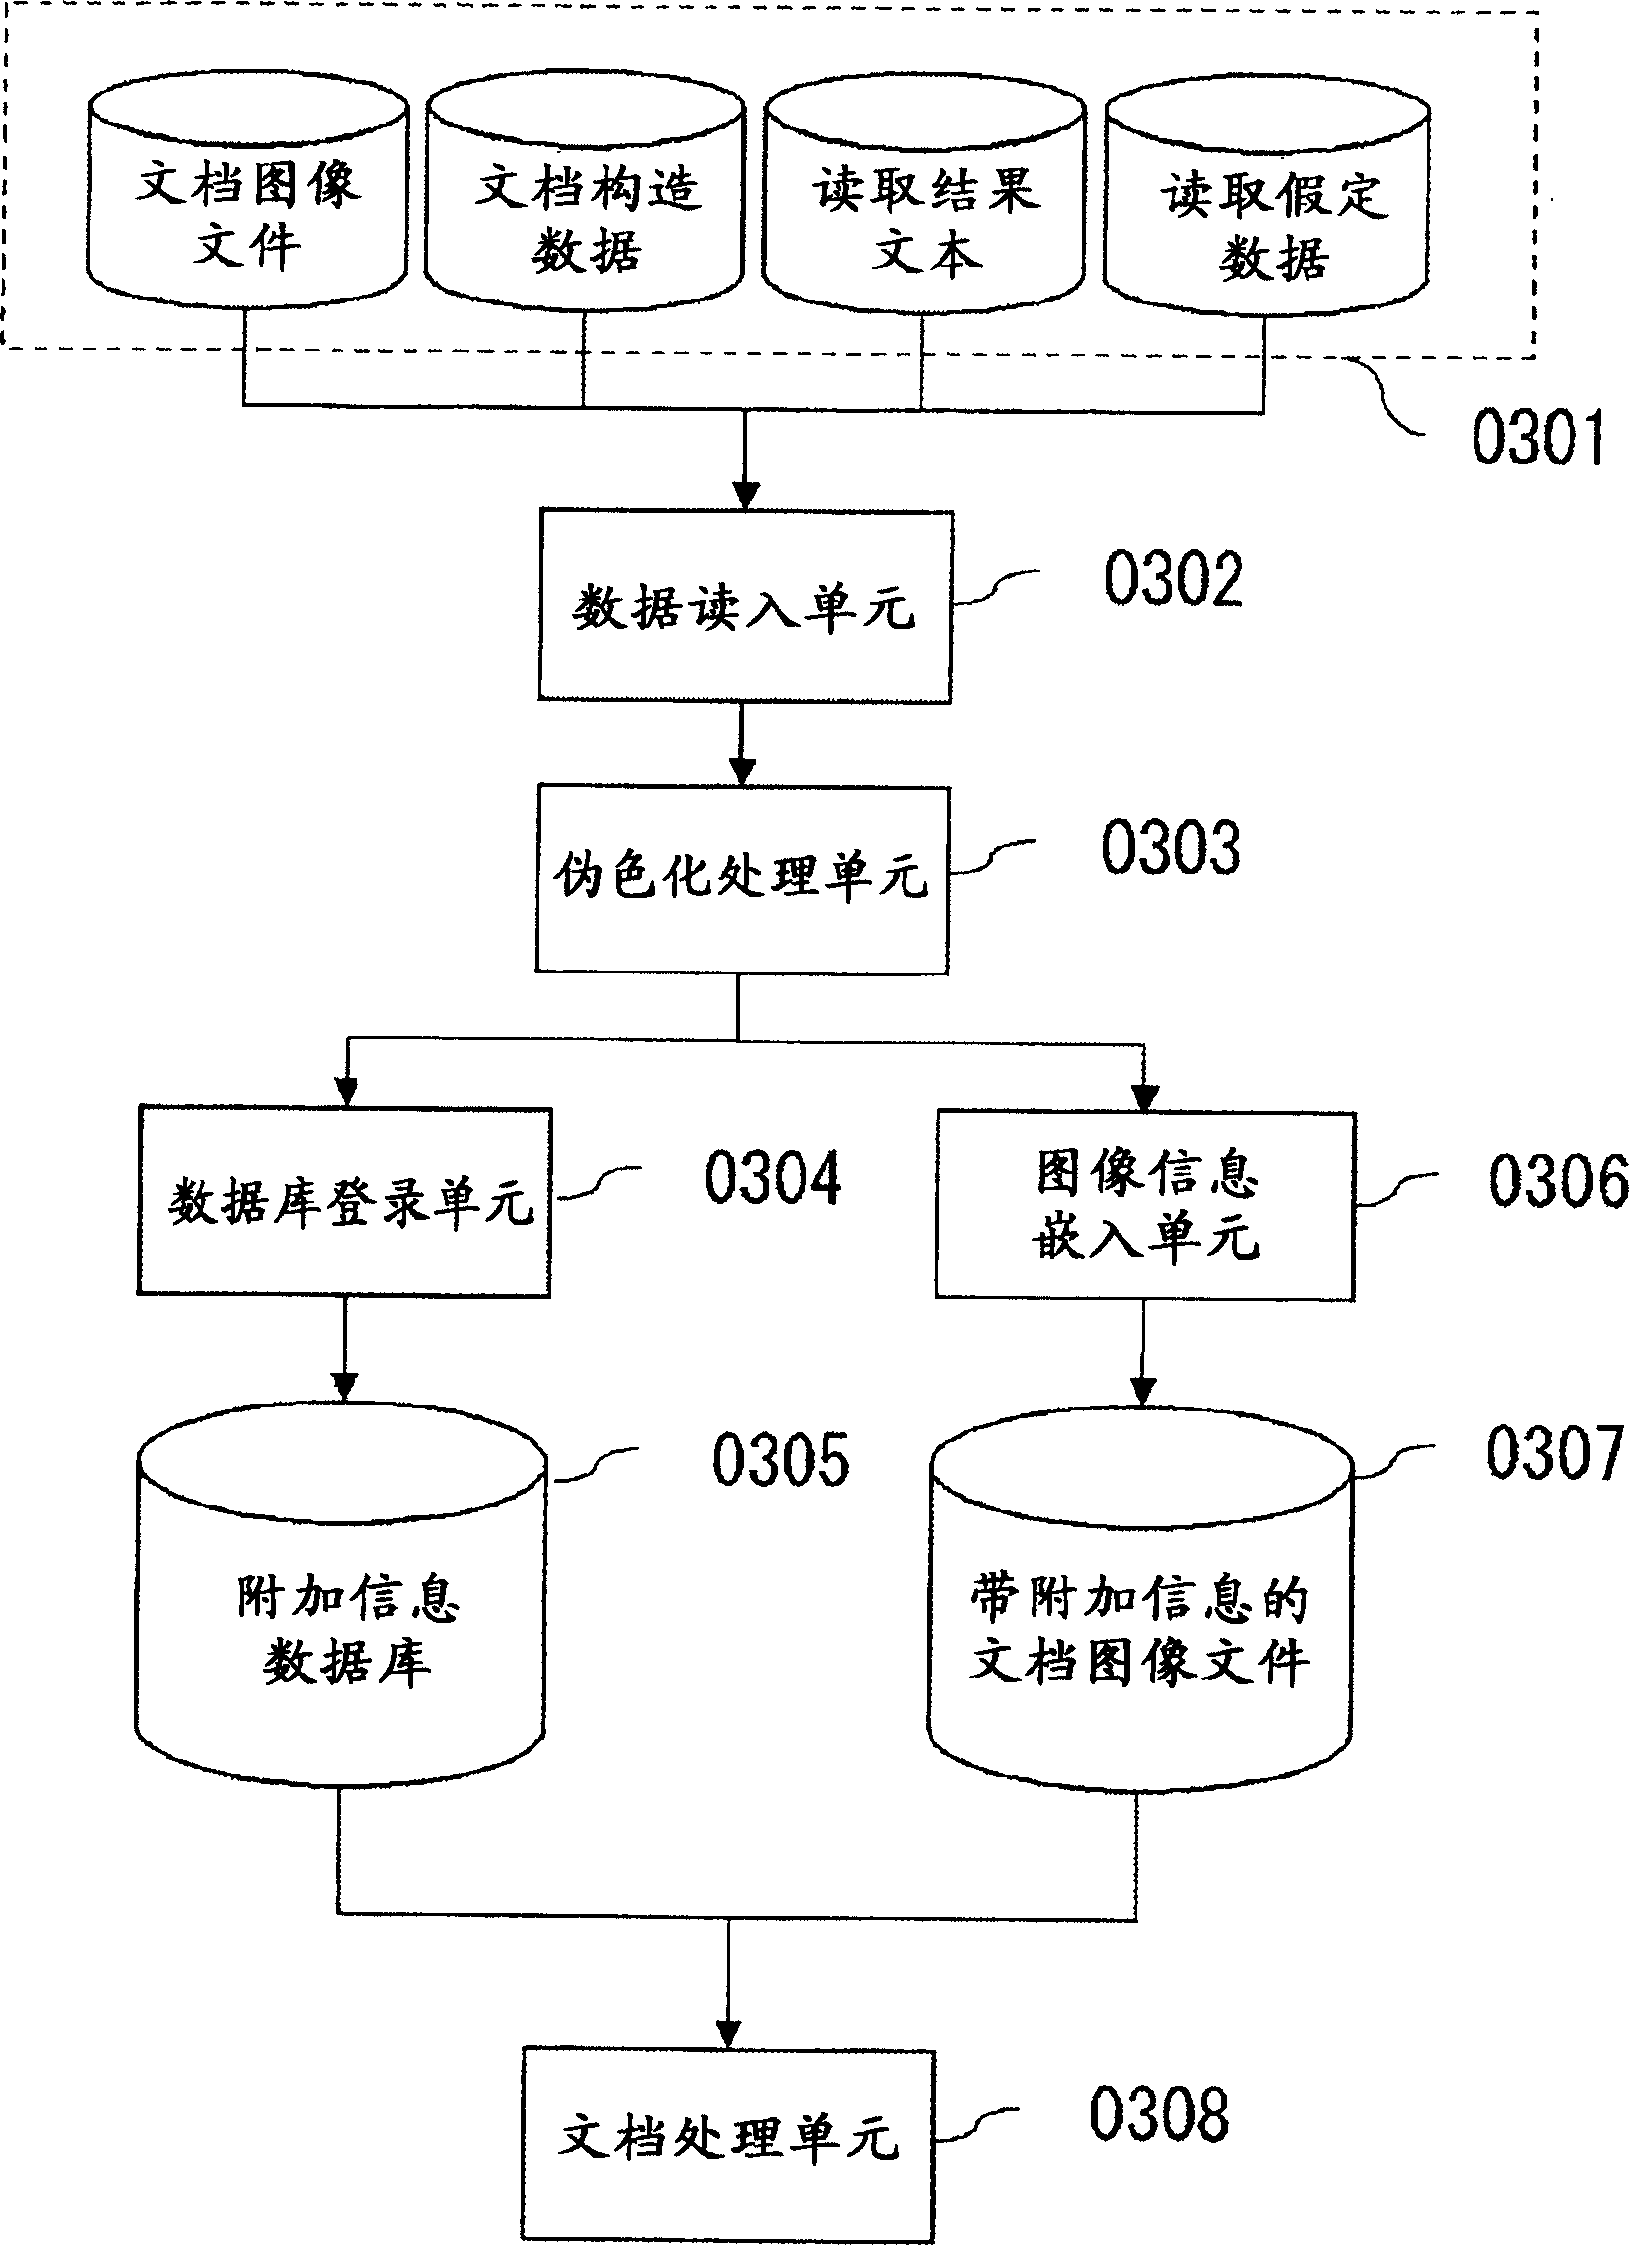 File searching and reading method and apparatus